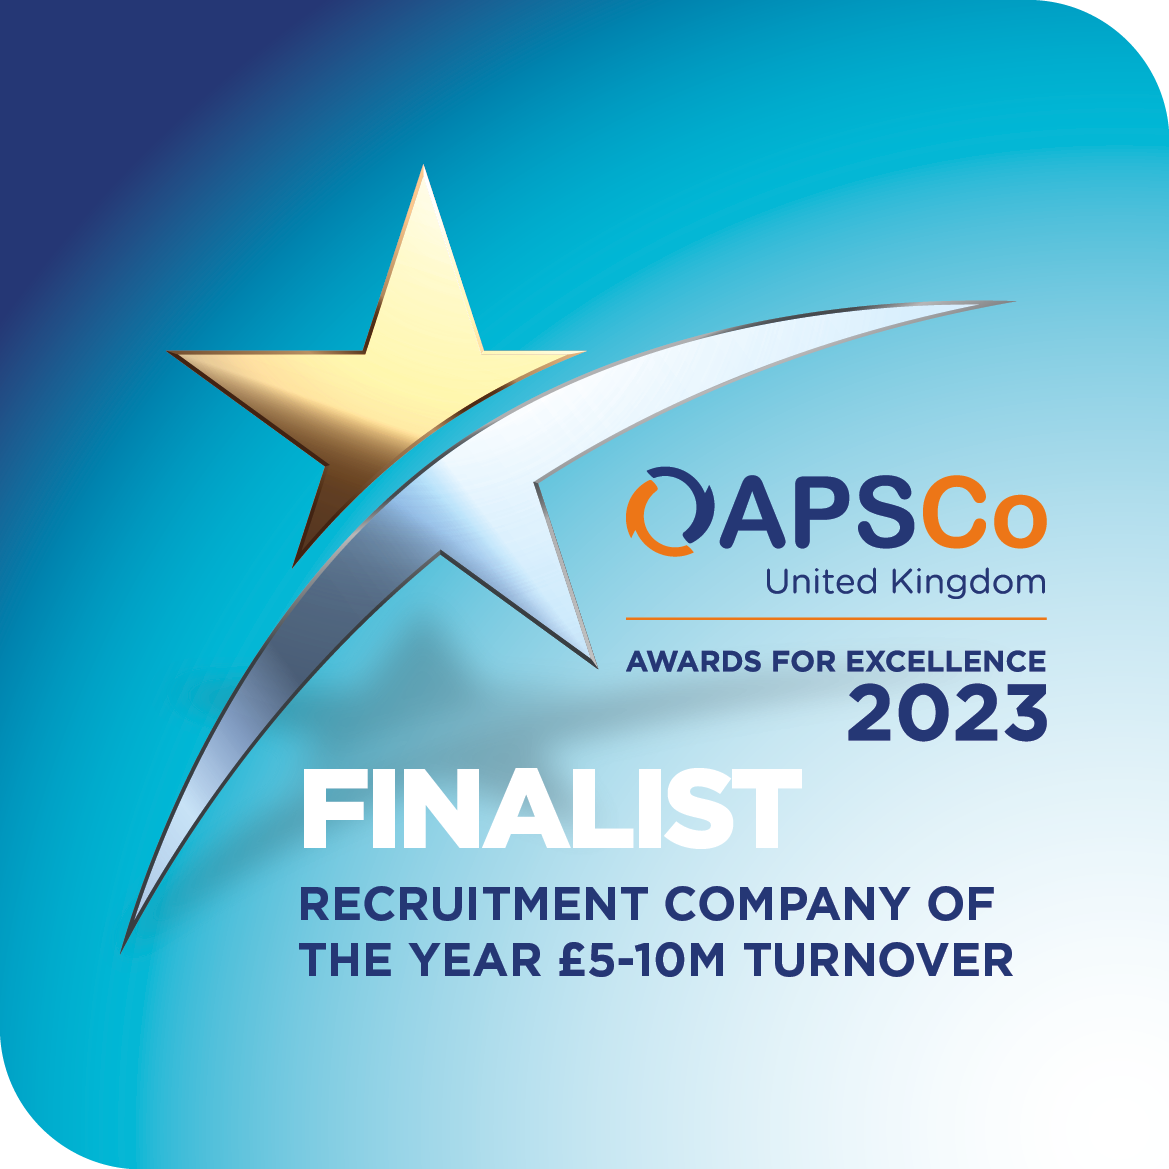 PCR Digital gets shortlisted for APSCo Awards for UK Recruitment Company of the Year